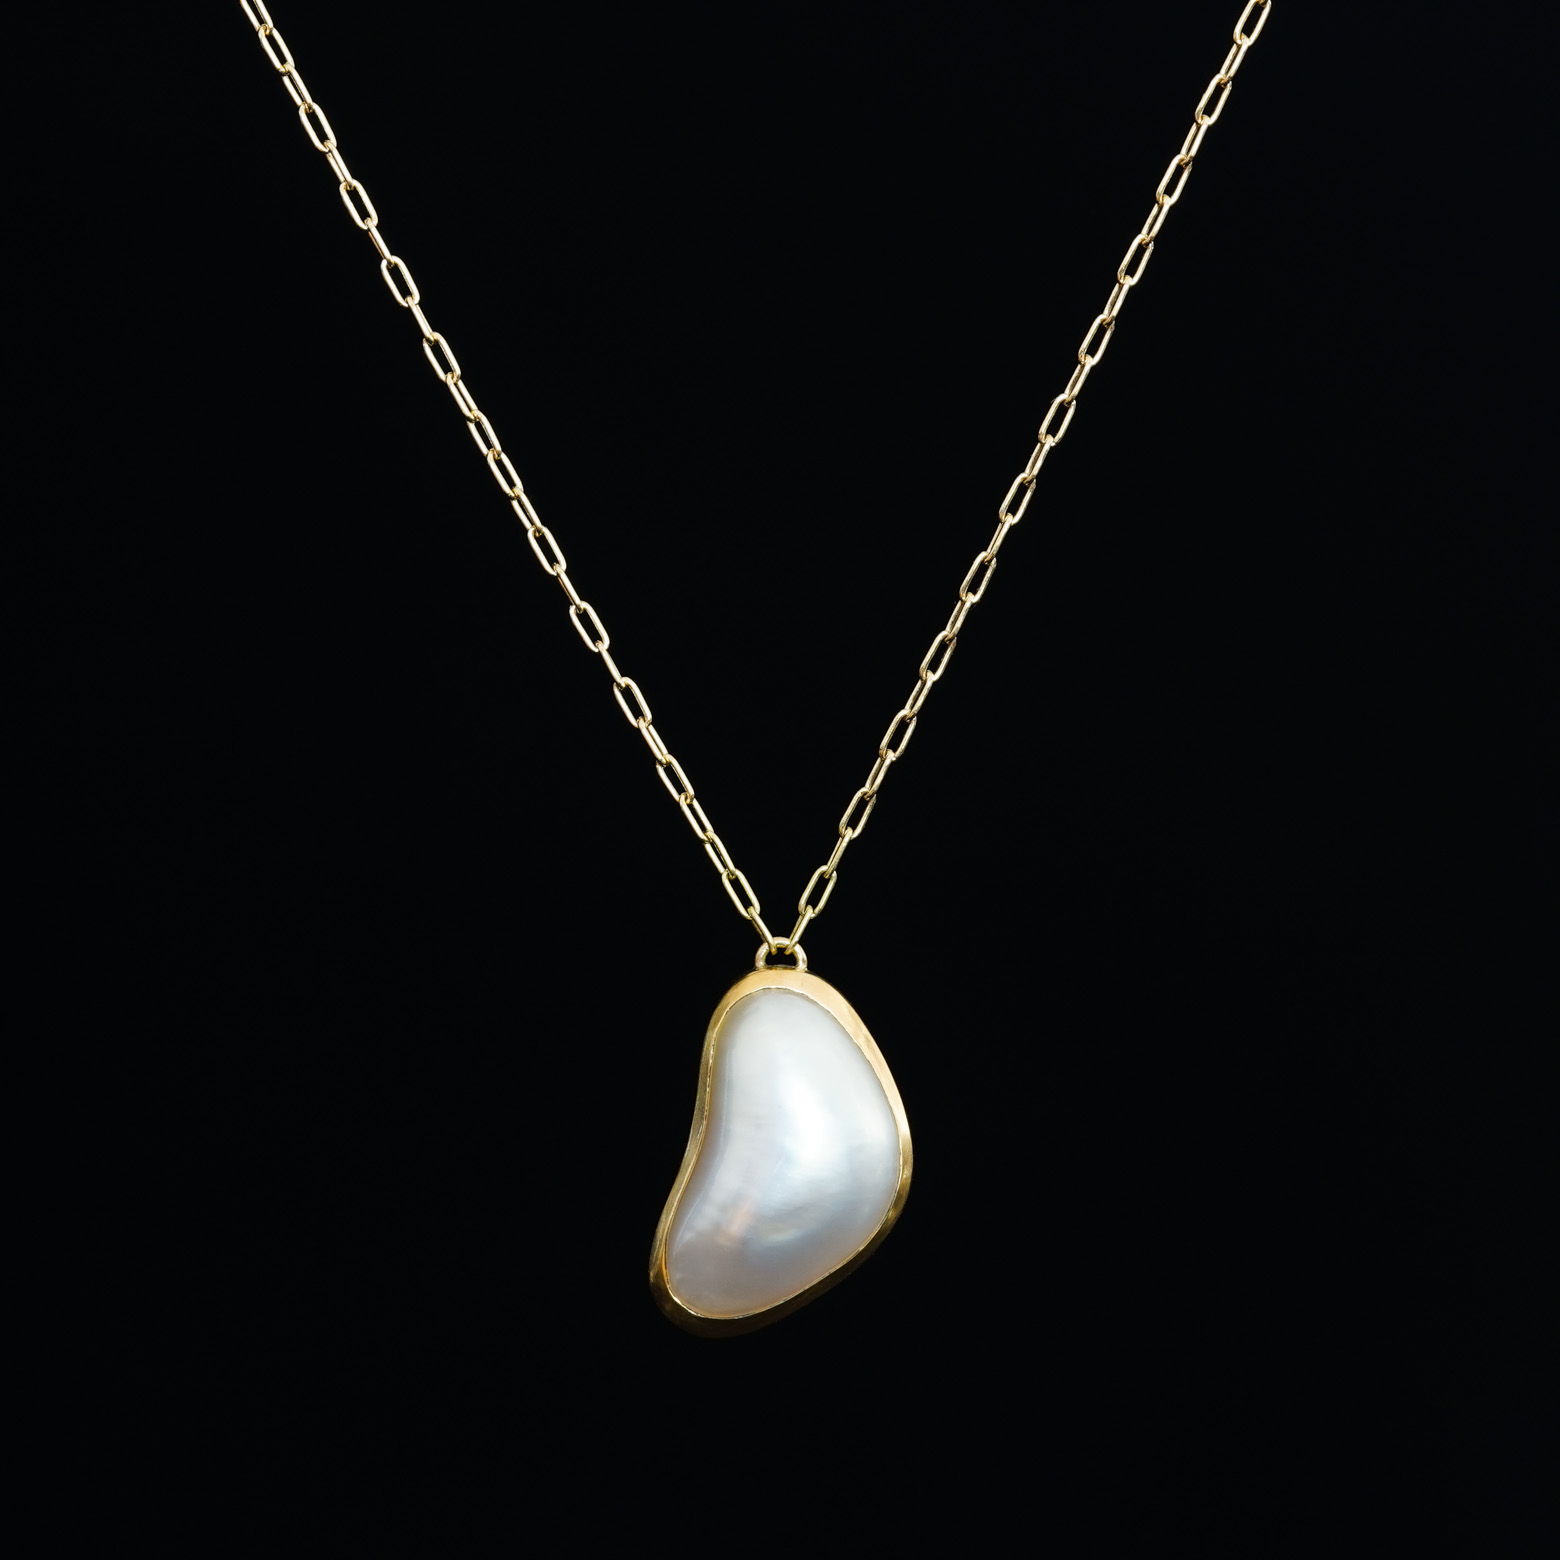 Half Keshi Pearl Necklace (SOURCE) - SOURCE objects